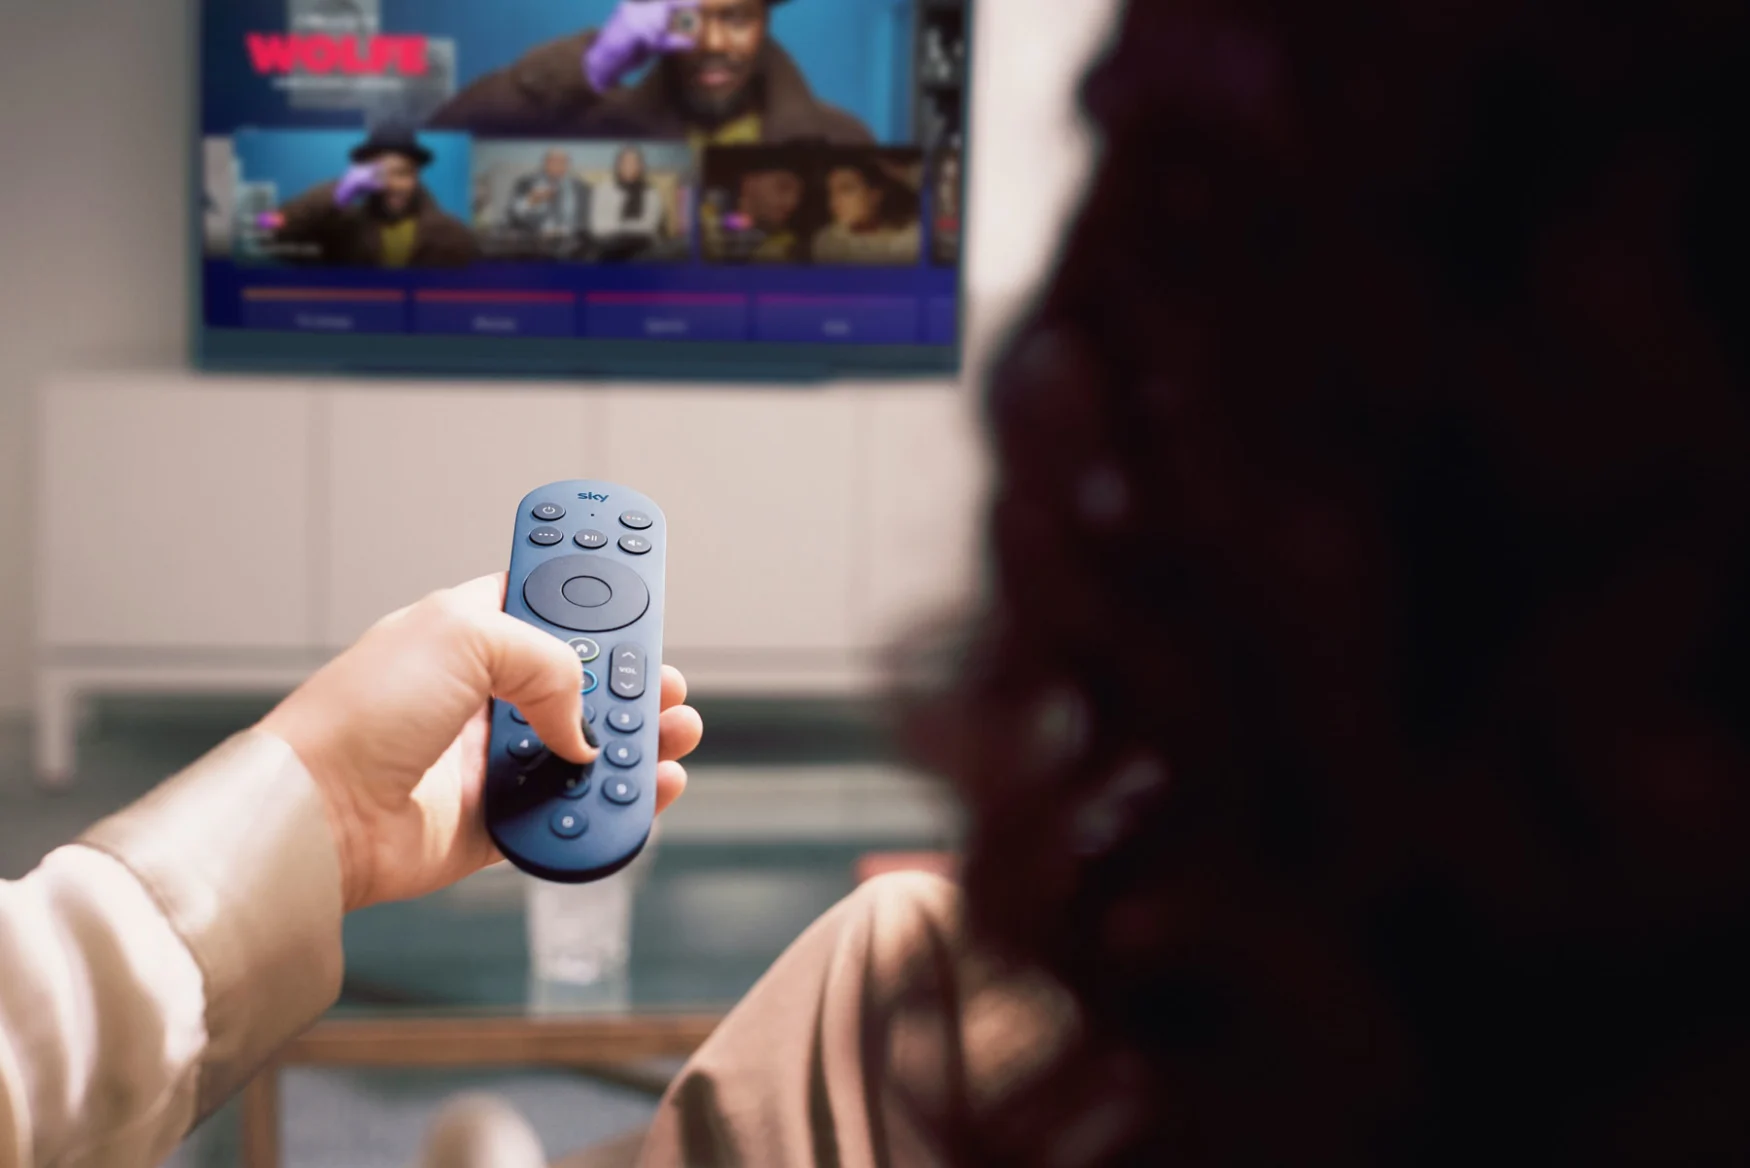 Image of the new Sky Glass voice remote